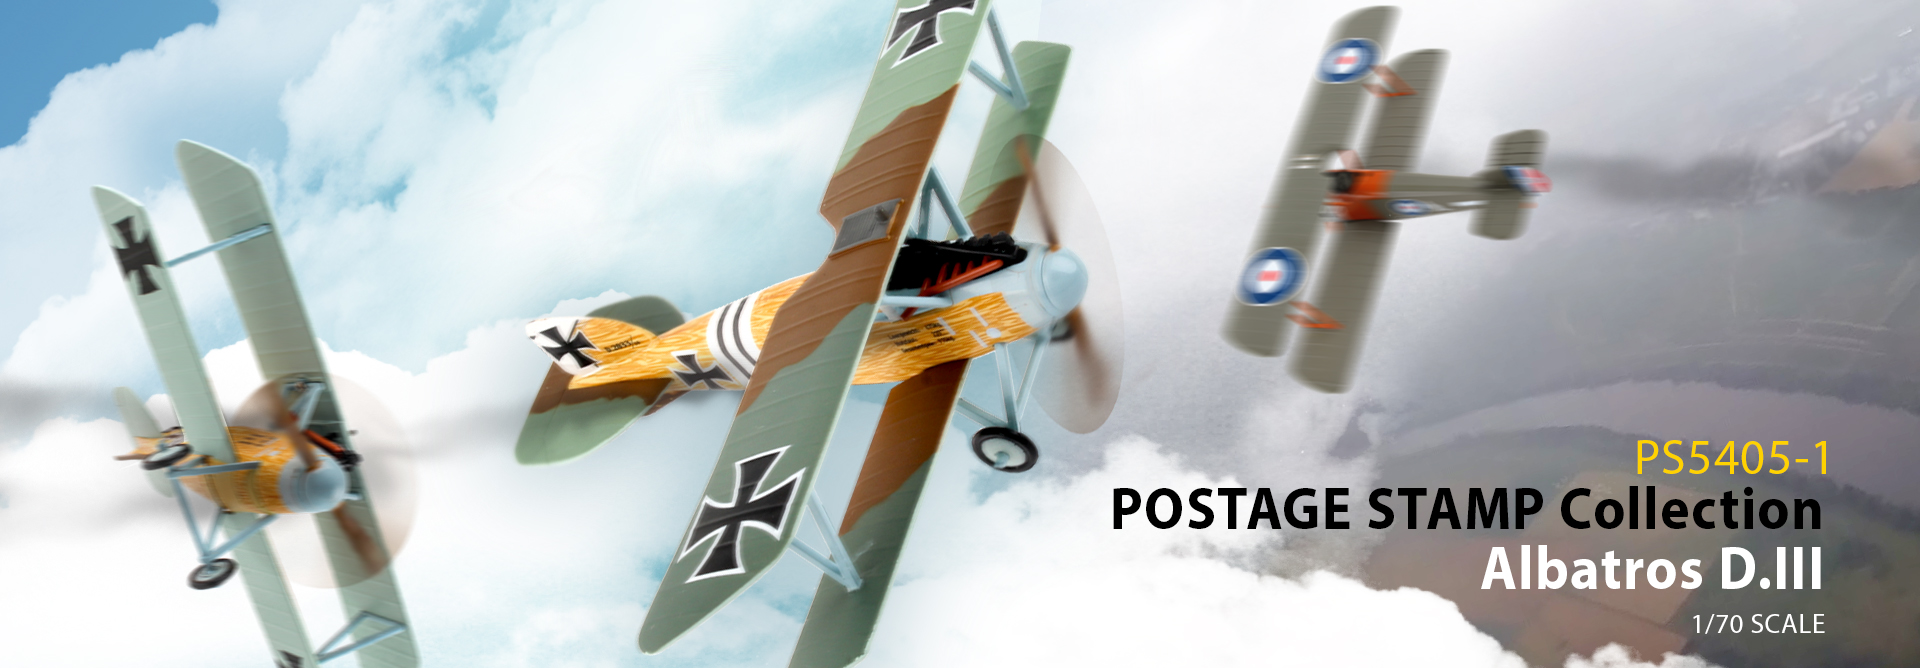 PS5405-1 POSTAGE STAMP COLLECTION ALBATROS D.III 1/70 SCALE